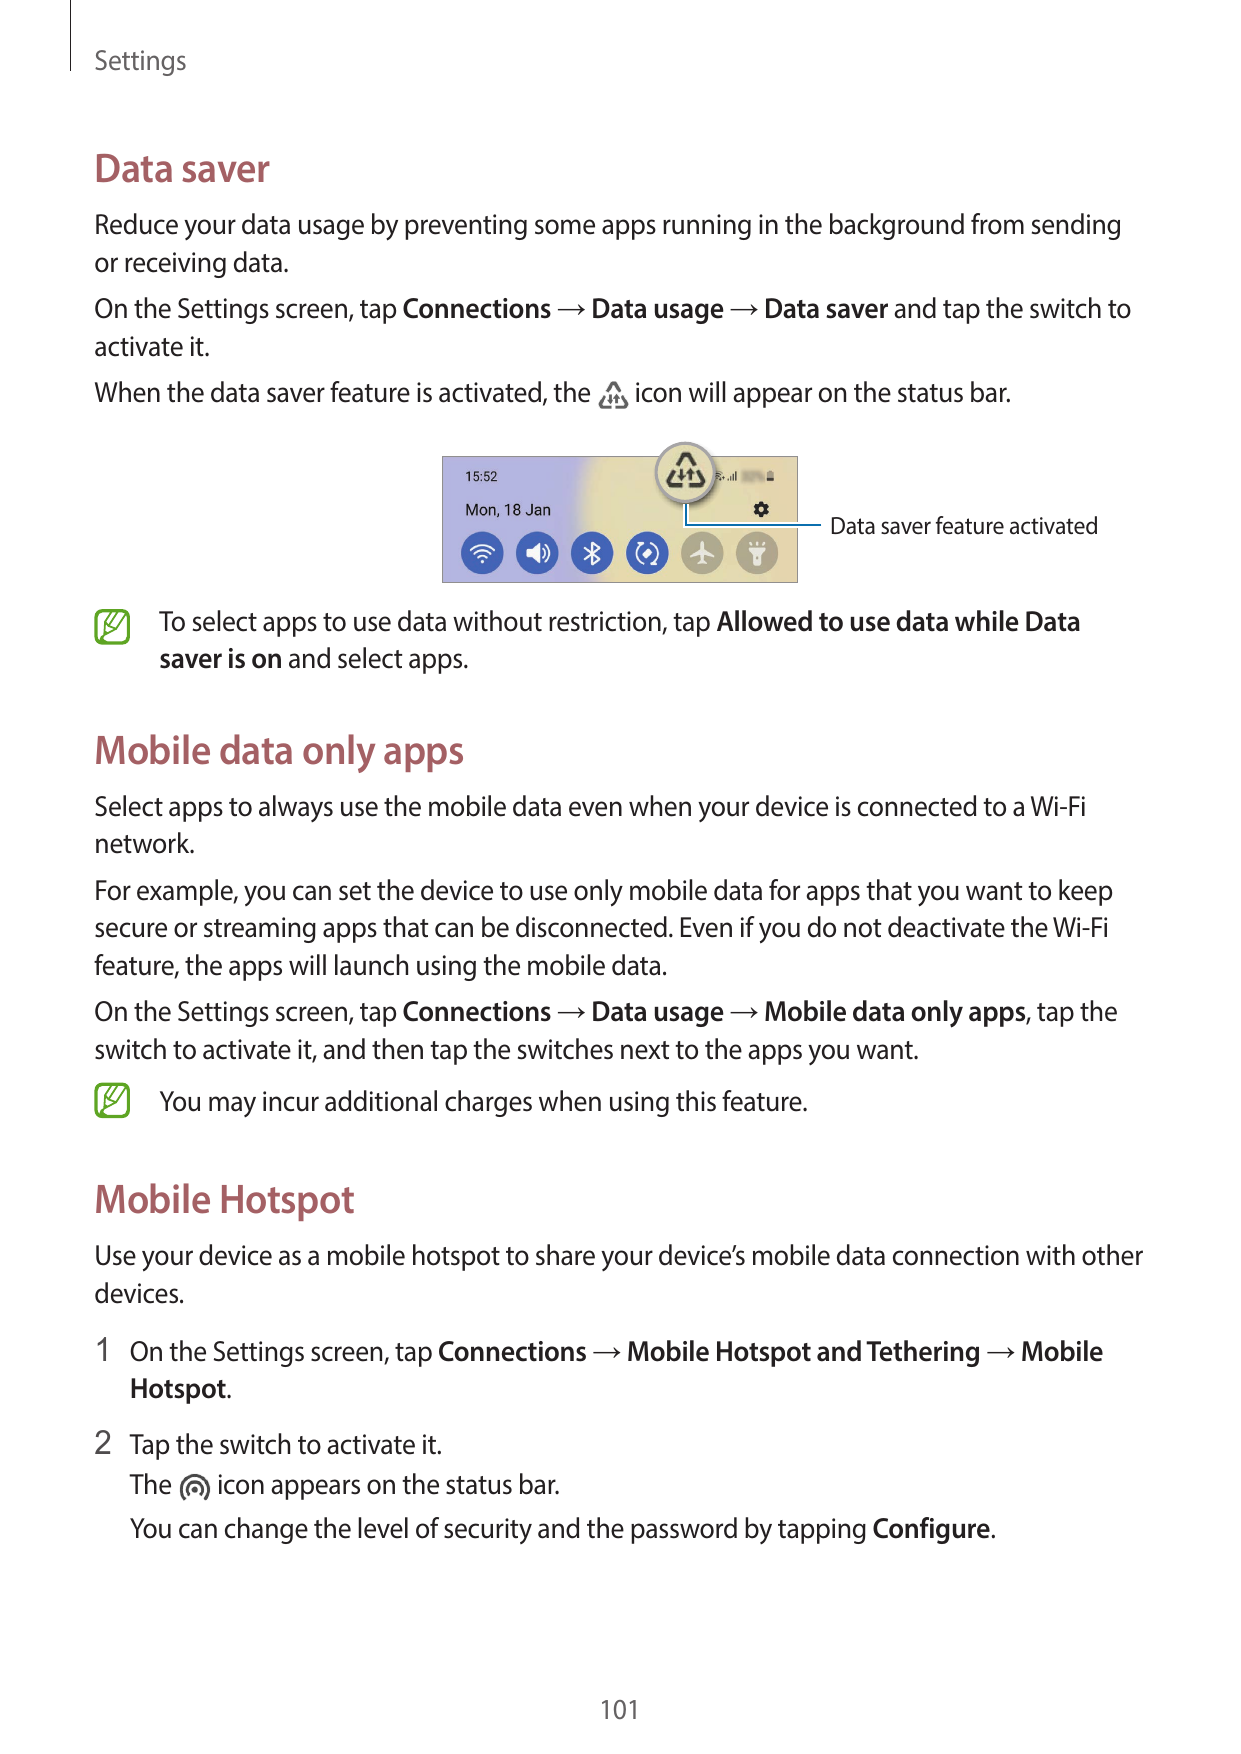 SettingsData saverReduce your data usage by preventing some apps running in the background from sendingor receiving data.On the 